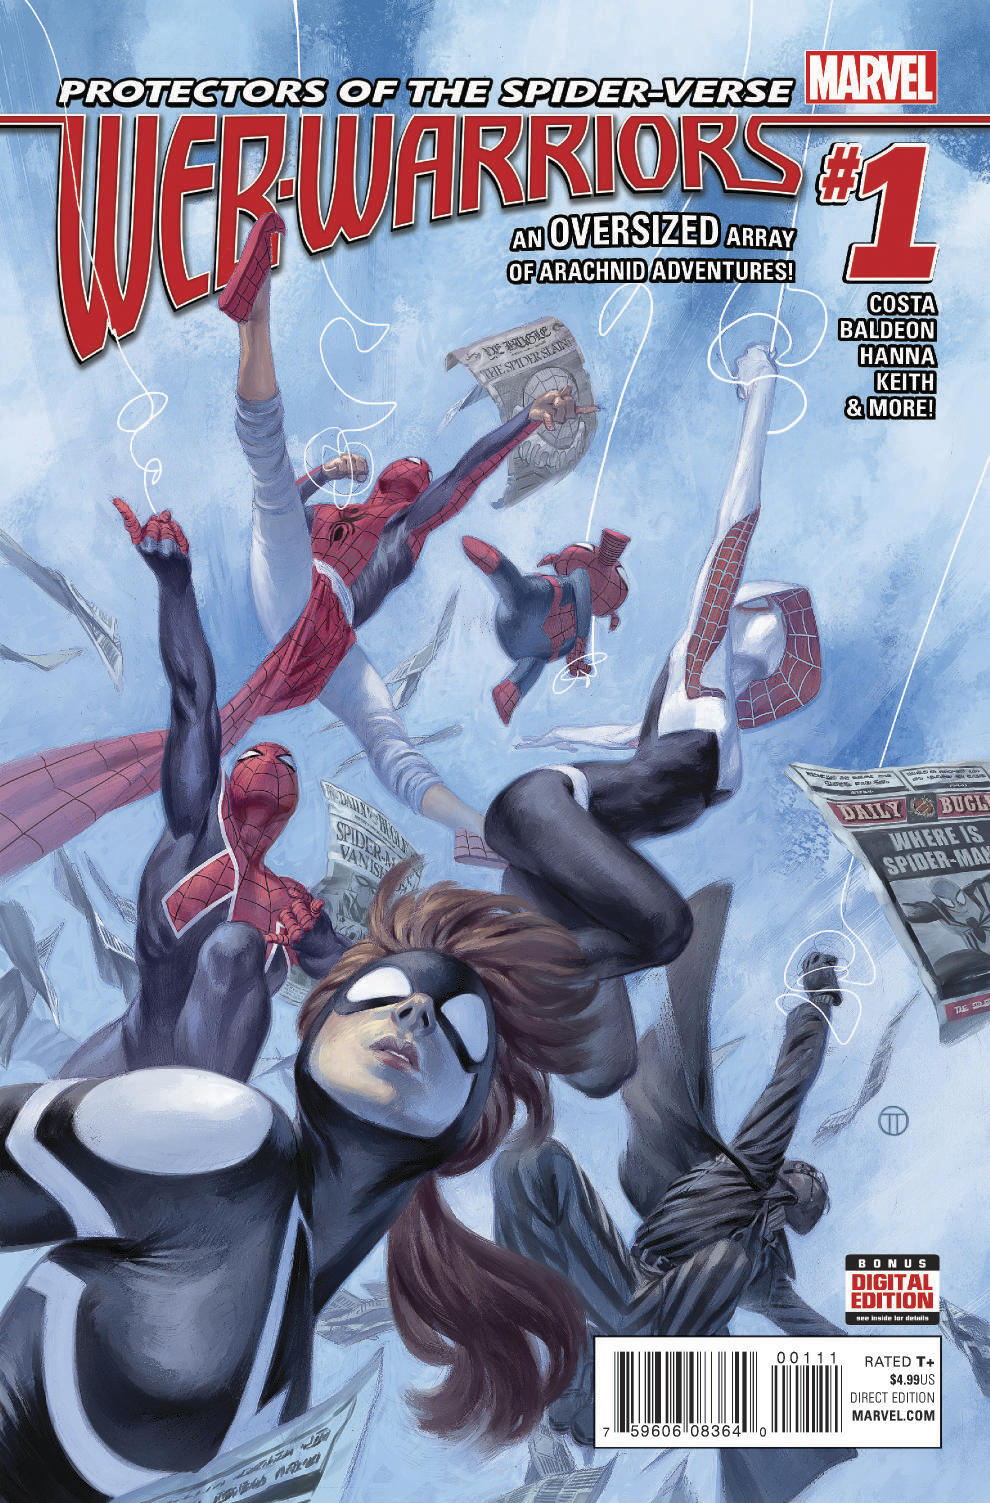 Web_Warriors_1_Cover